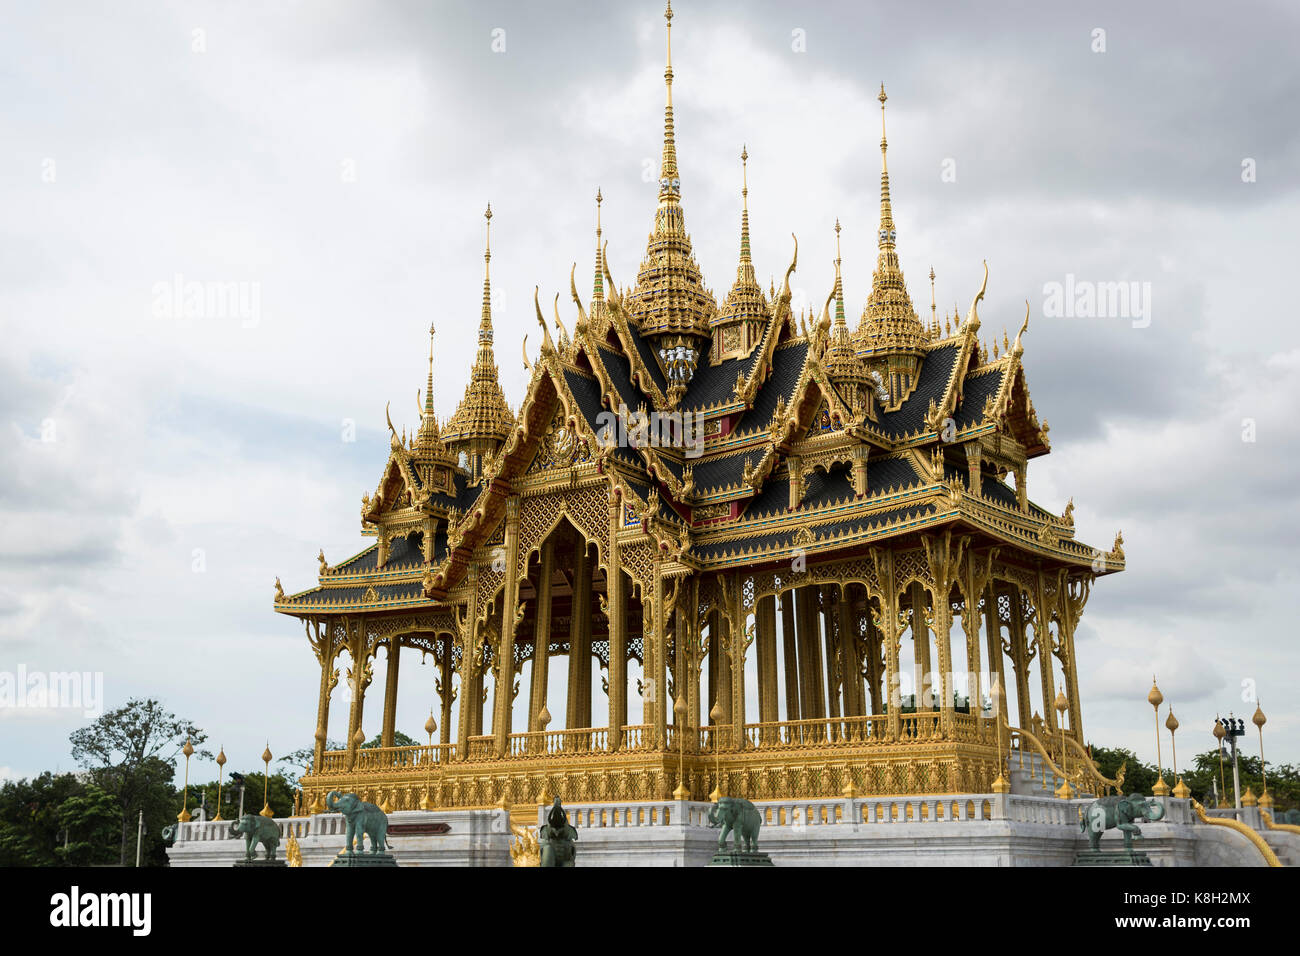 The Borommangalanusarani Pavilion was built within the compound of the Ananta Samakhom Throne Hall, Bangkok and opened to the media on June, 6th 2016. Stock Photo